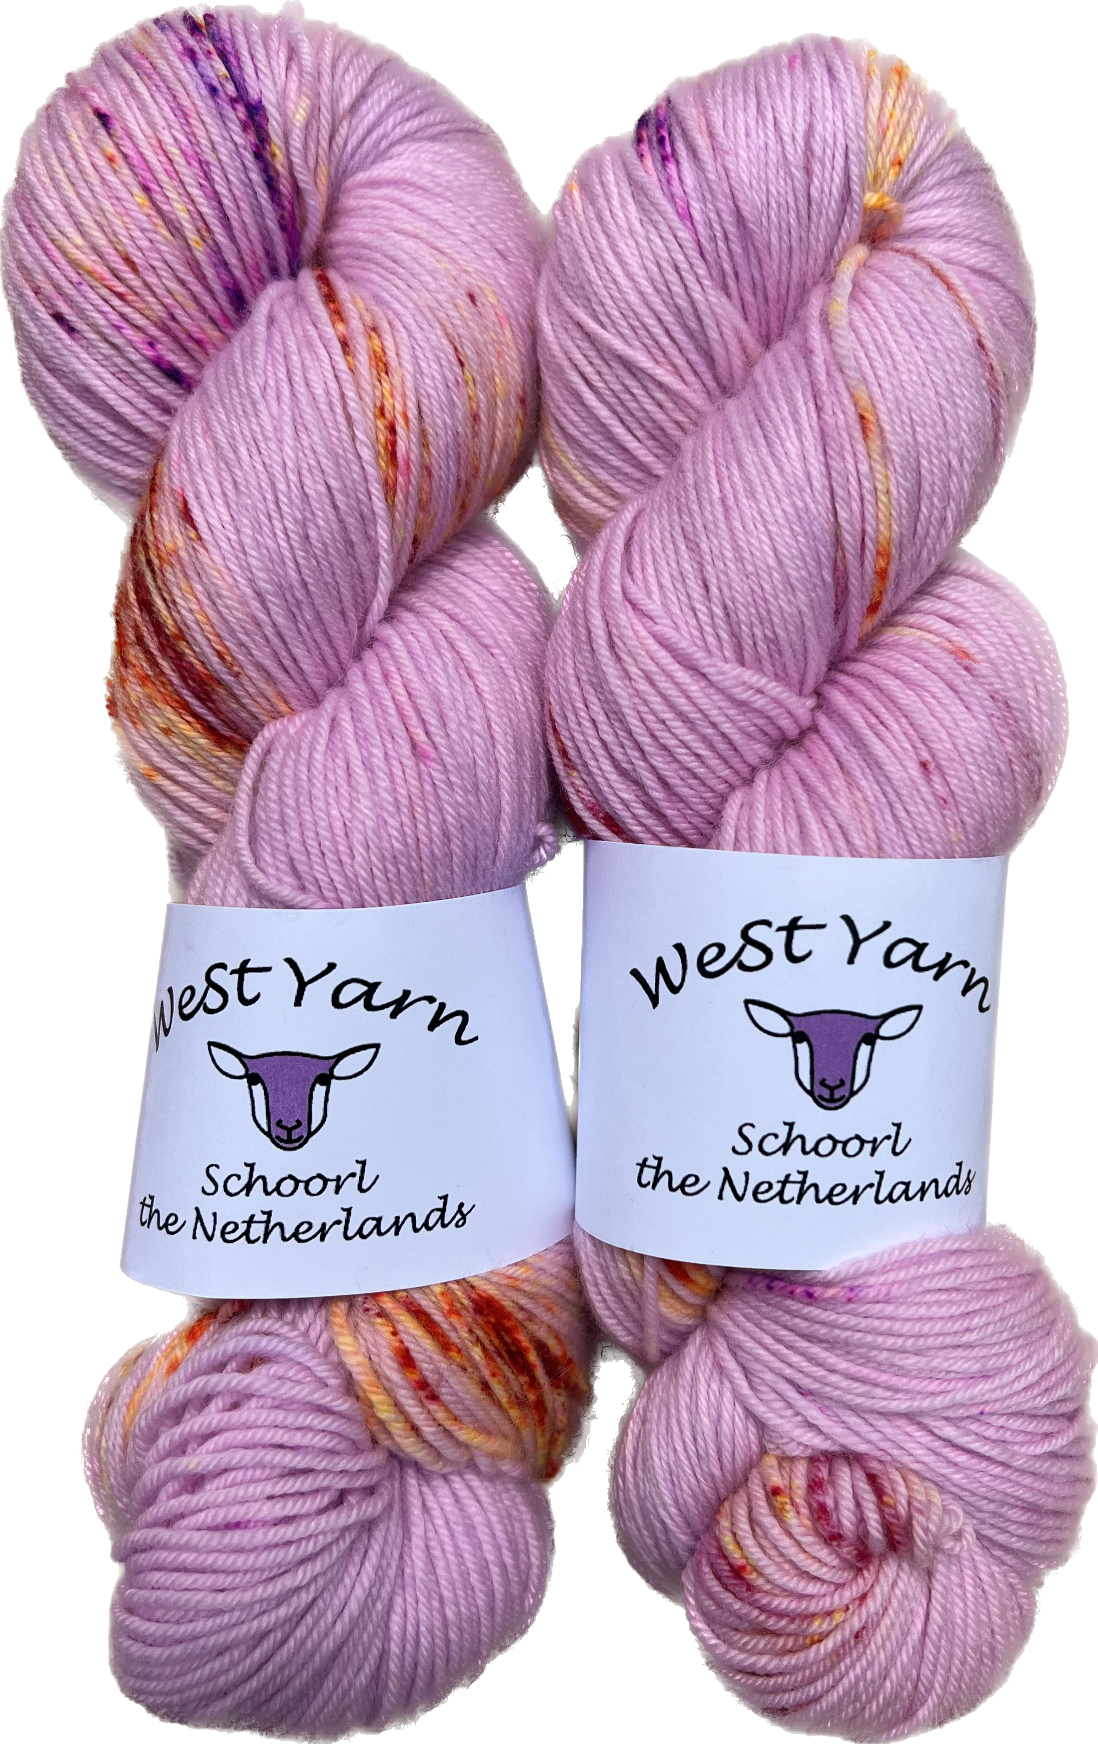 Flaming Lilac Deluxe Sock 